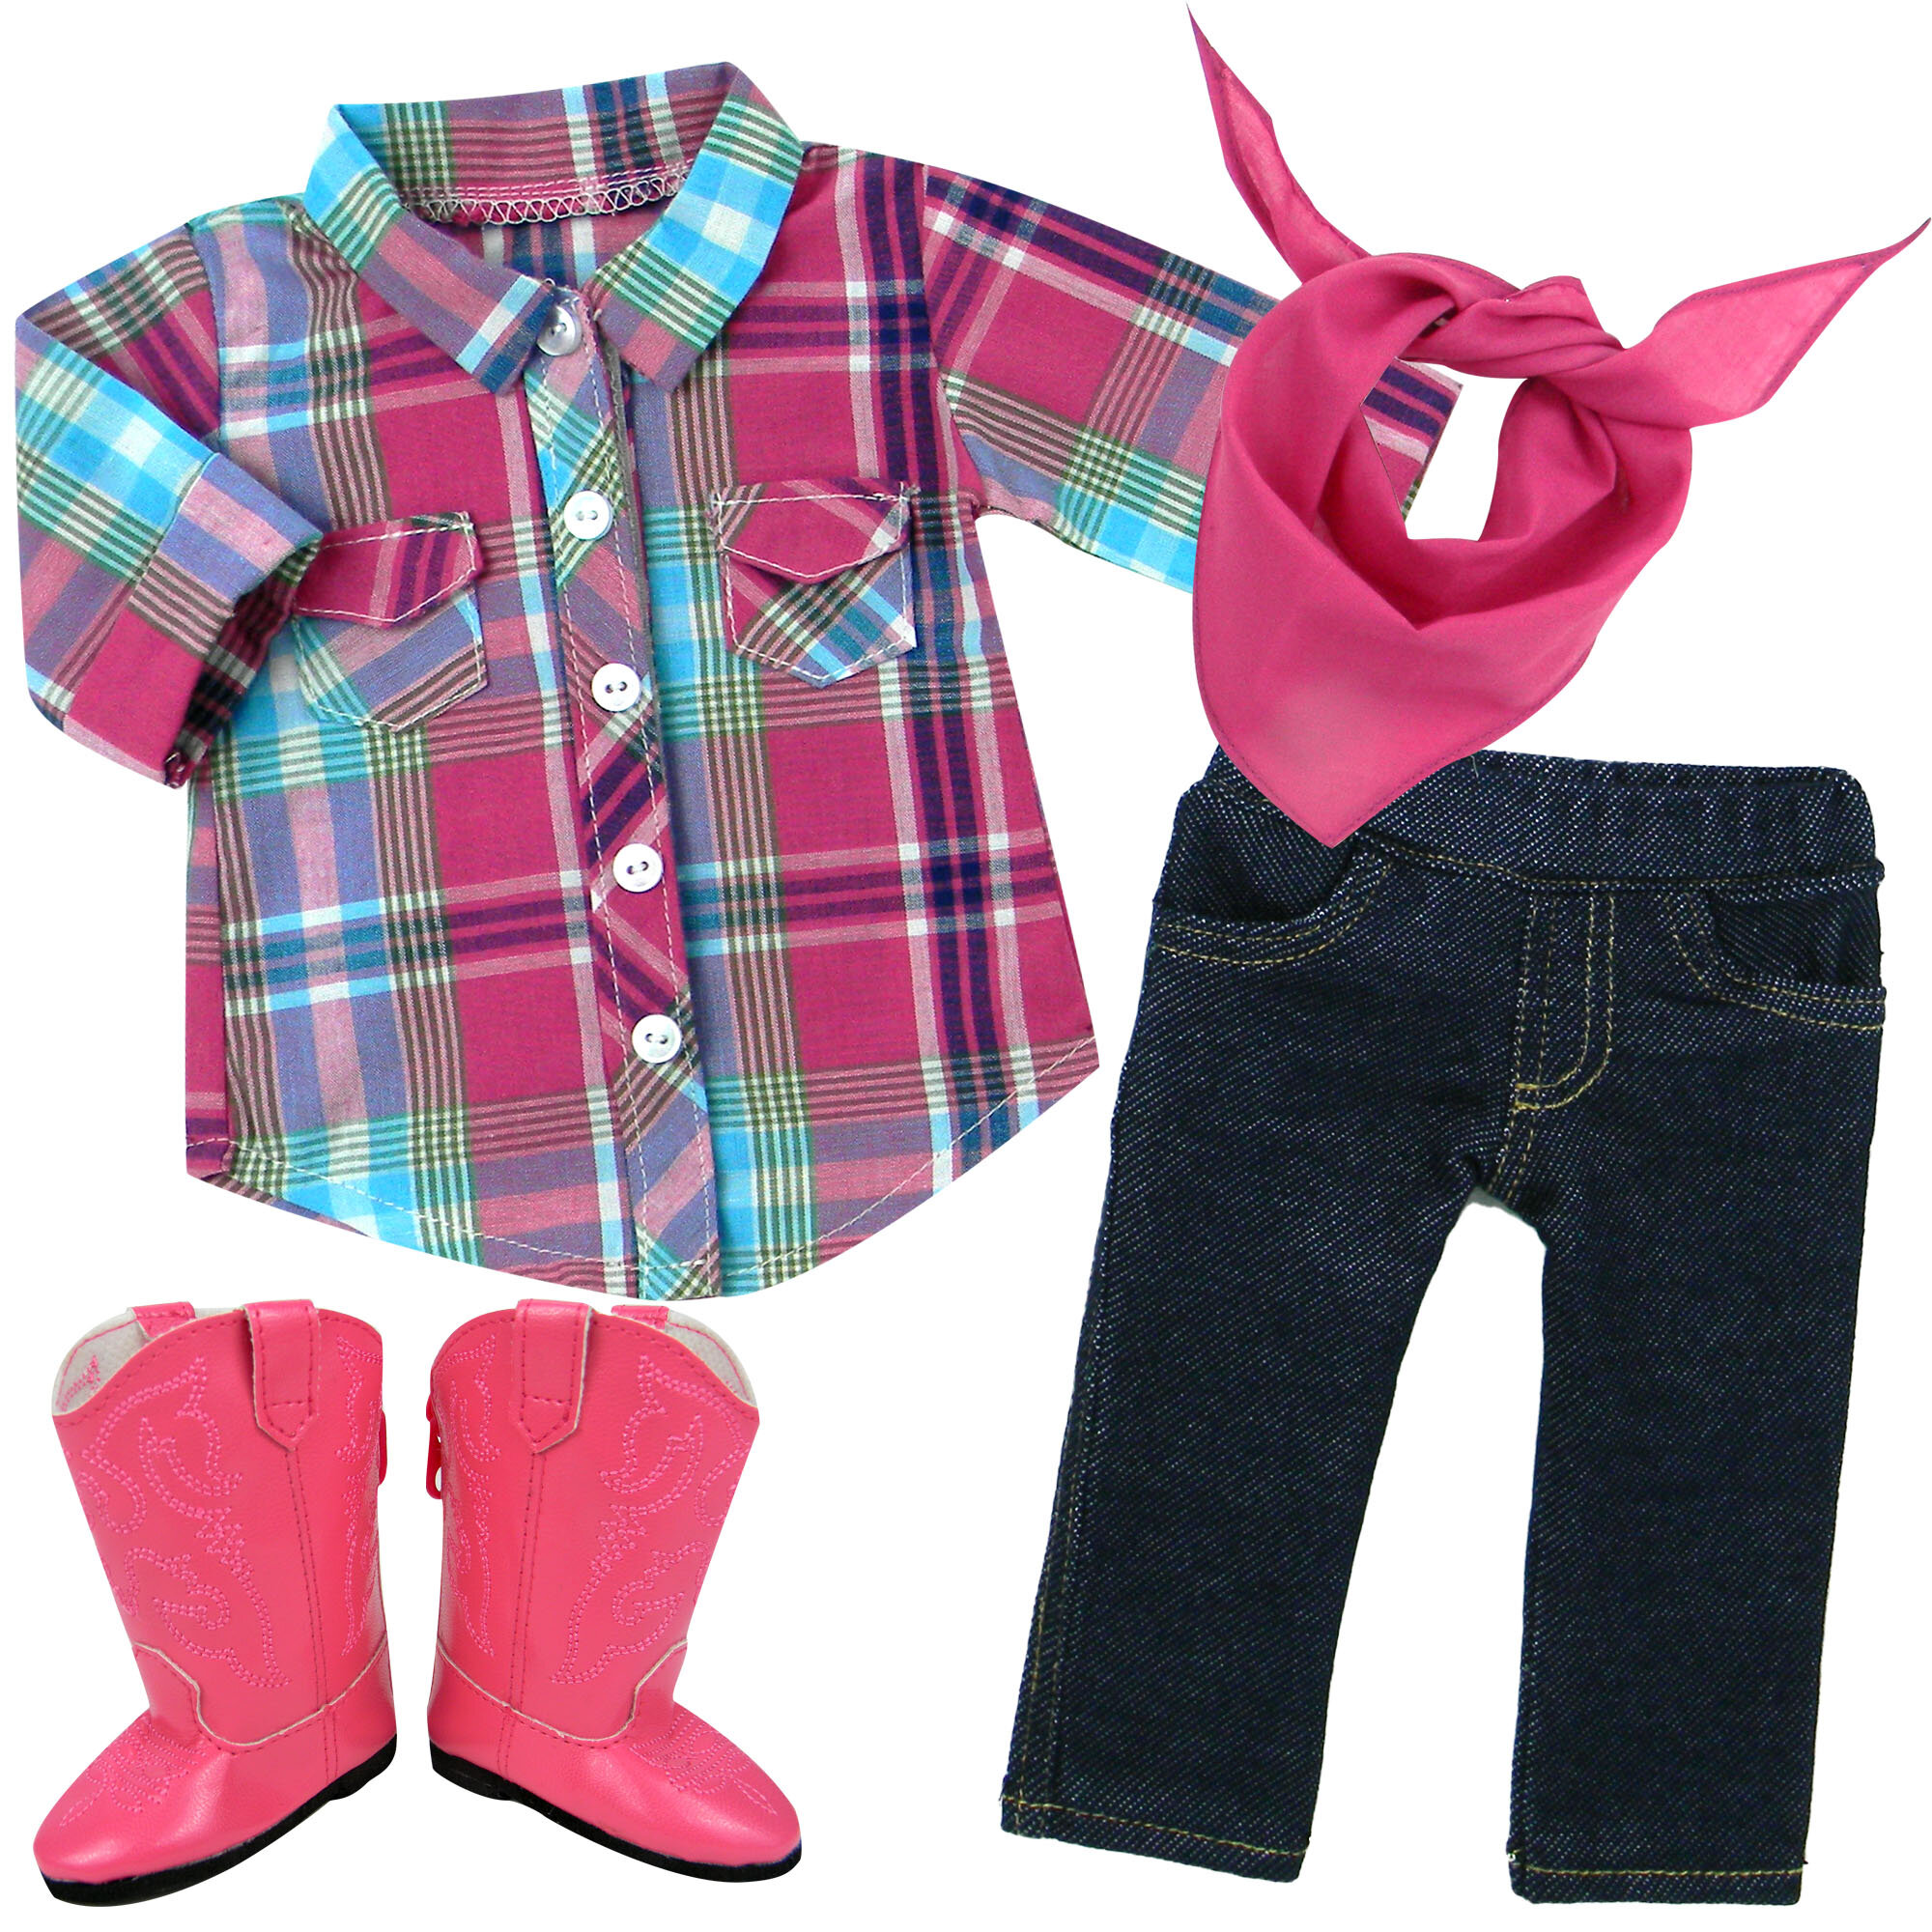 Navy Plaid Tunic and Stretch Denim Jeans made to fit 18 inch dolls